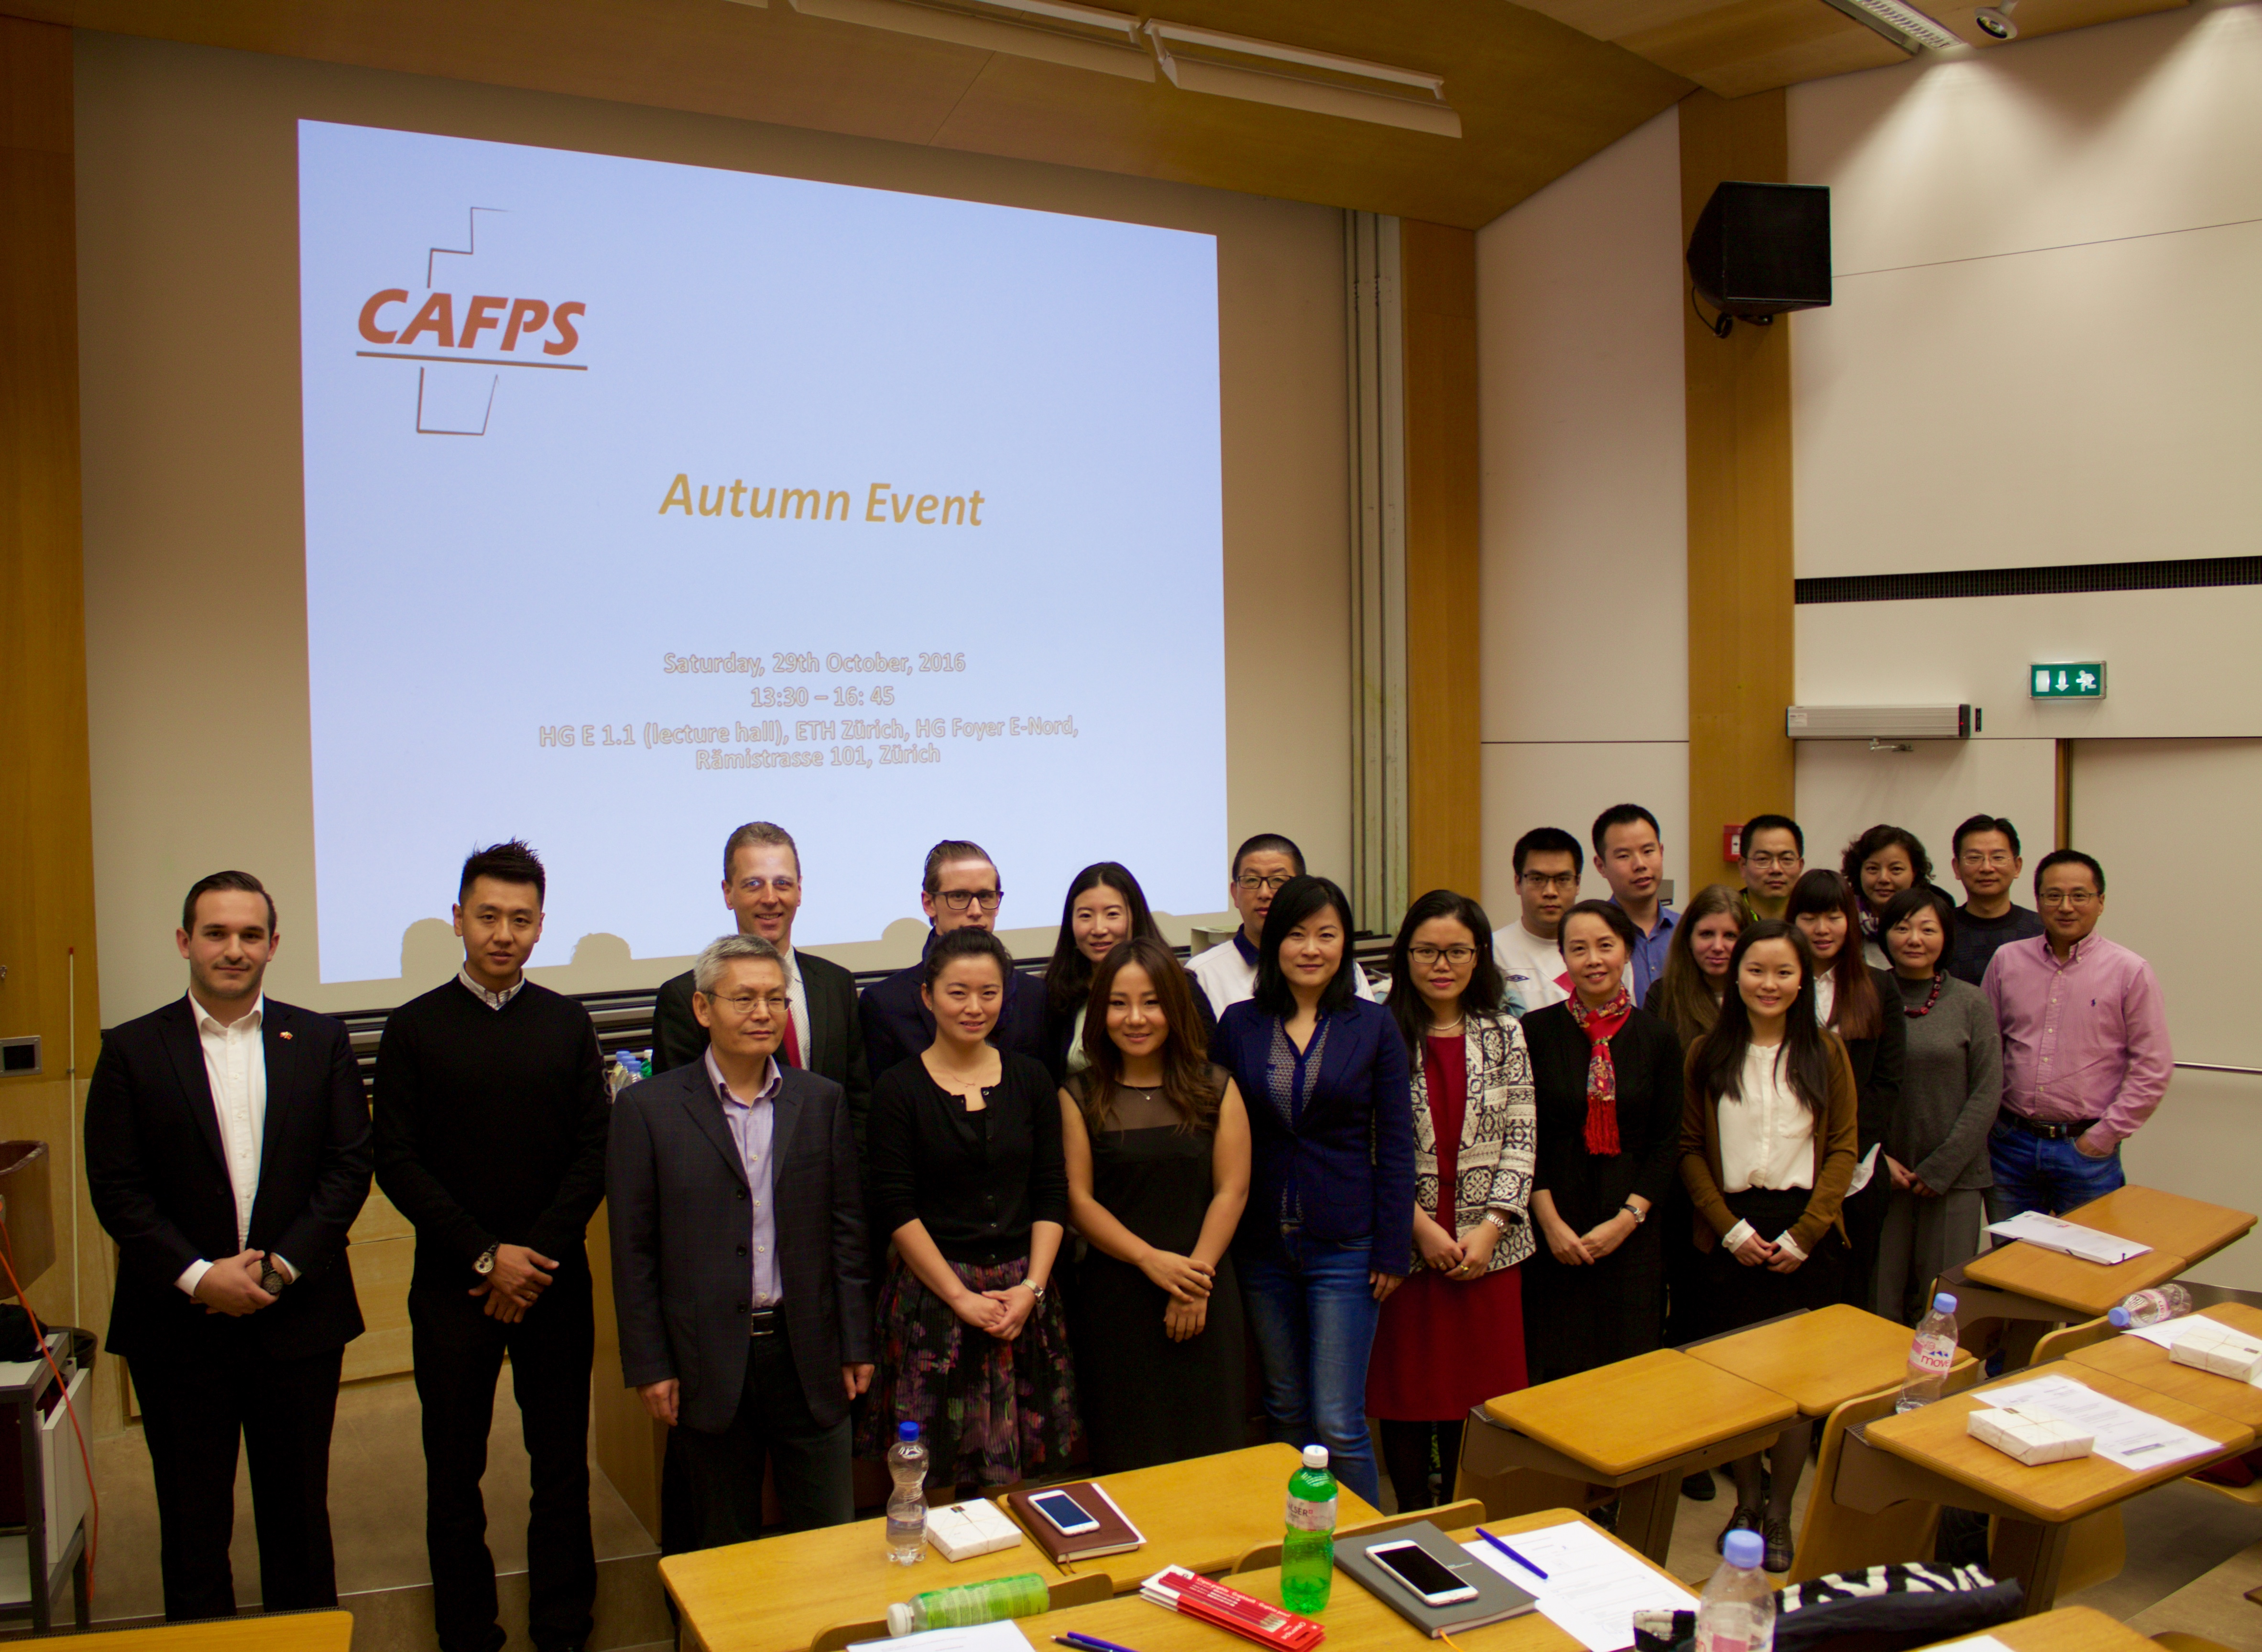 You are currently viewing Autumn Event 2016 of the CAFPS